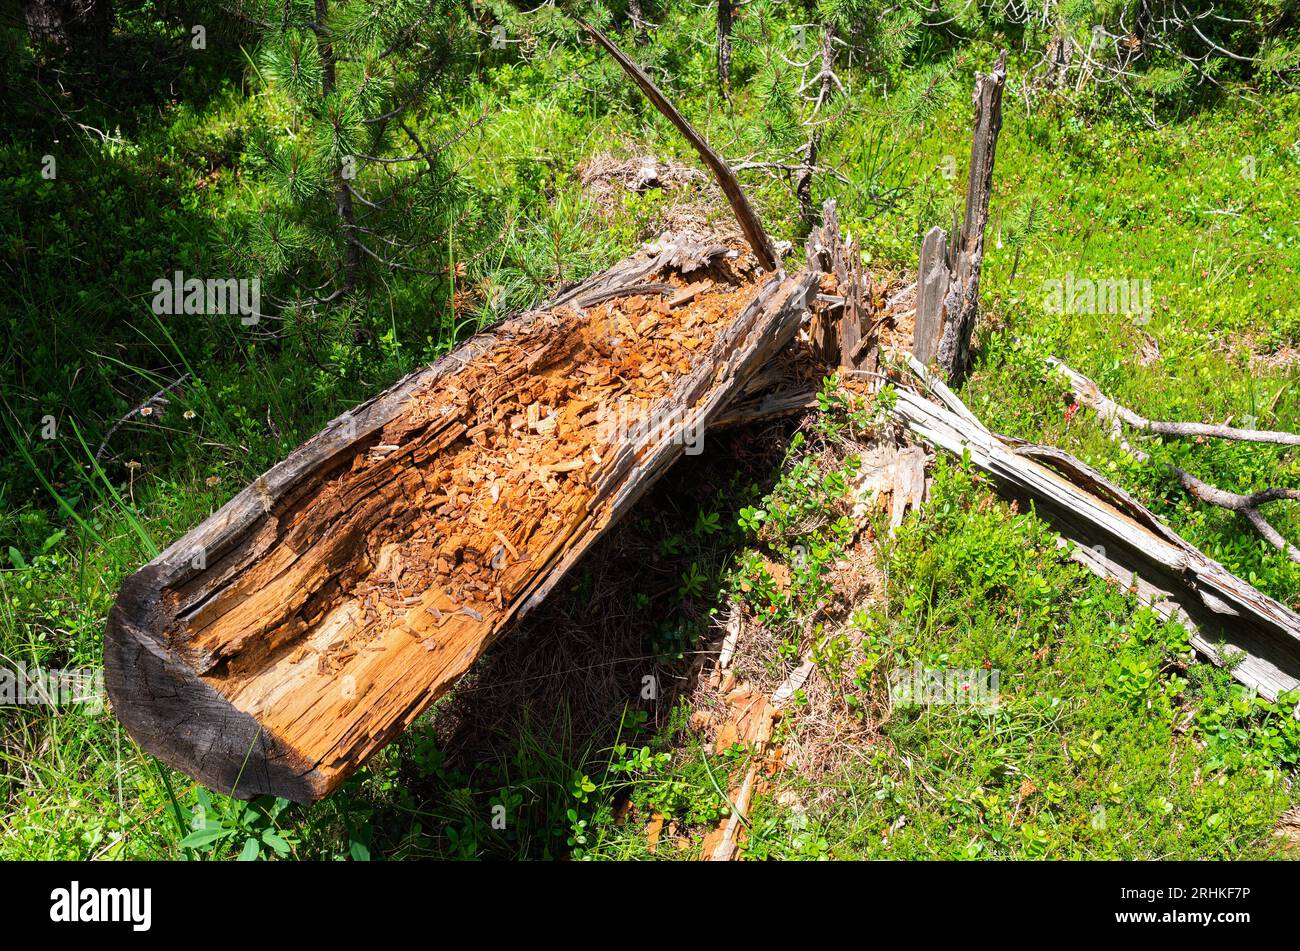 Fallen dry tree Trunk in the Swiss National Park, famous for untouched nature, located in the Western Rhaetian Alps, in eastern Switzerland. Stock Photo